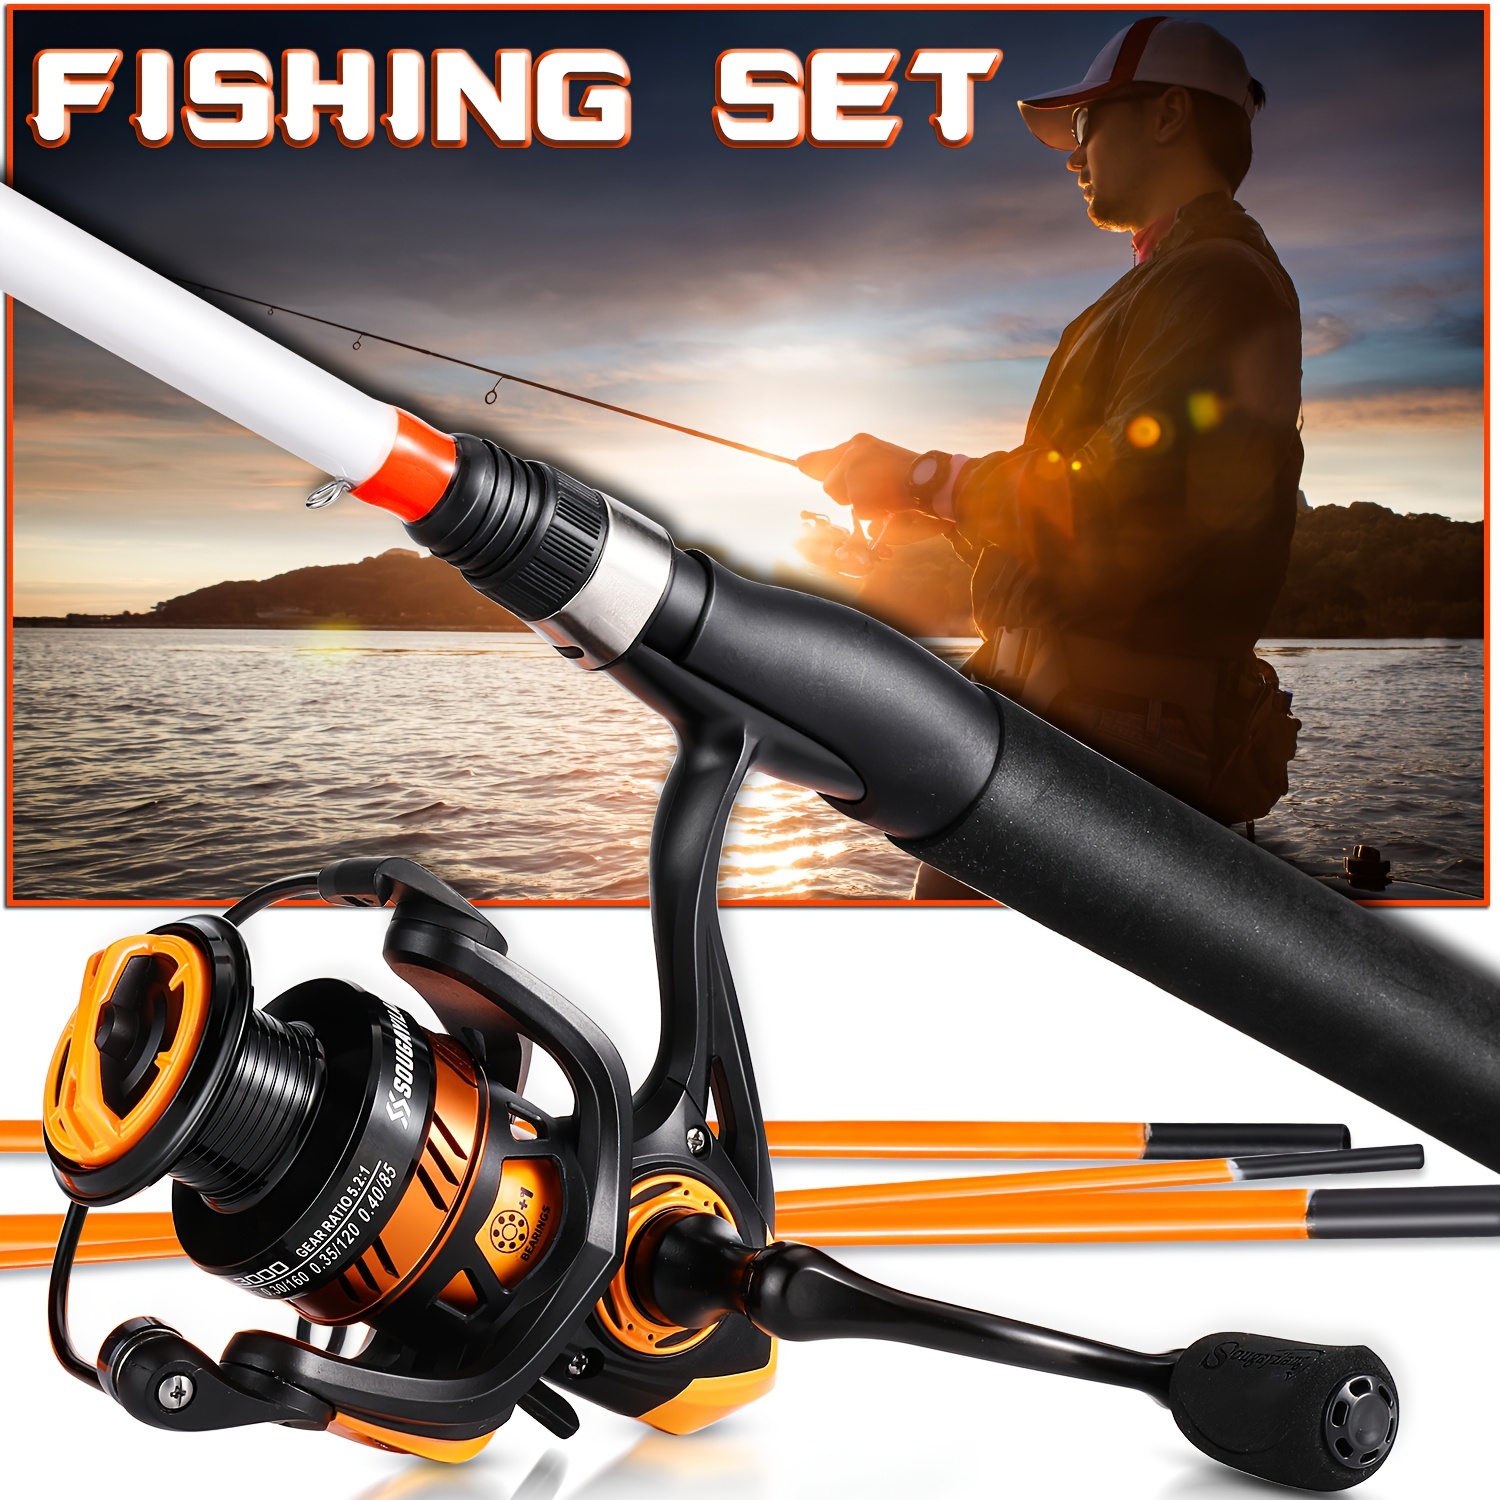 Sougayilang Spinning Reel And Fishing Rod Combination Set, Including  2-section Durable Carbon Fishing Rod, 5.2:1 Gear Ratio Fishing Reel With  EVA